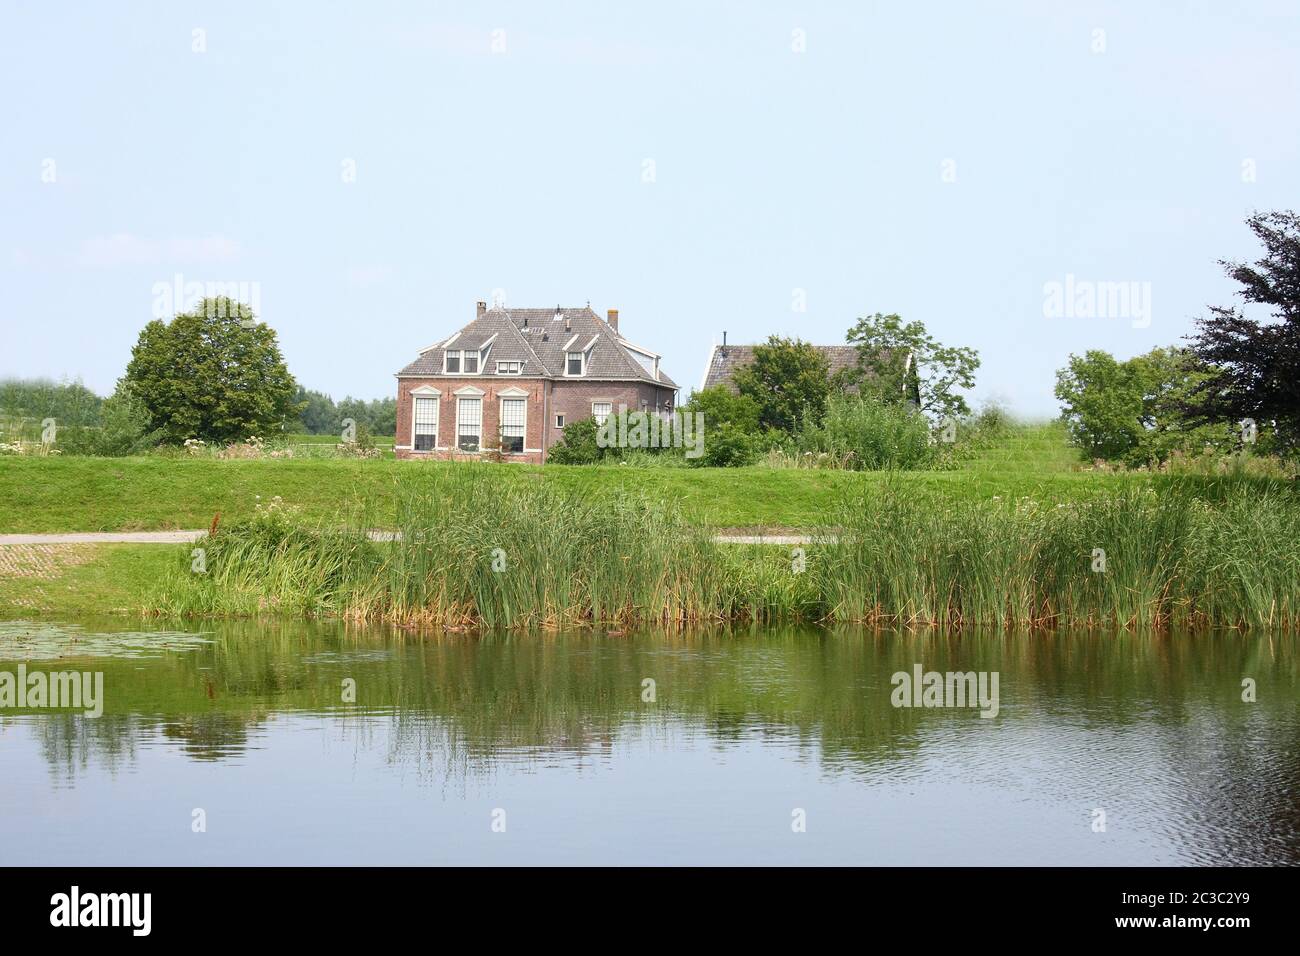 Lonely old House, with a body of water in the foreground Stock Photo